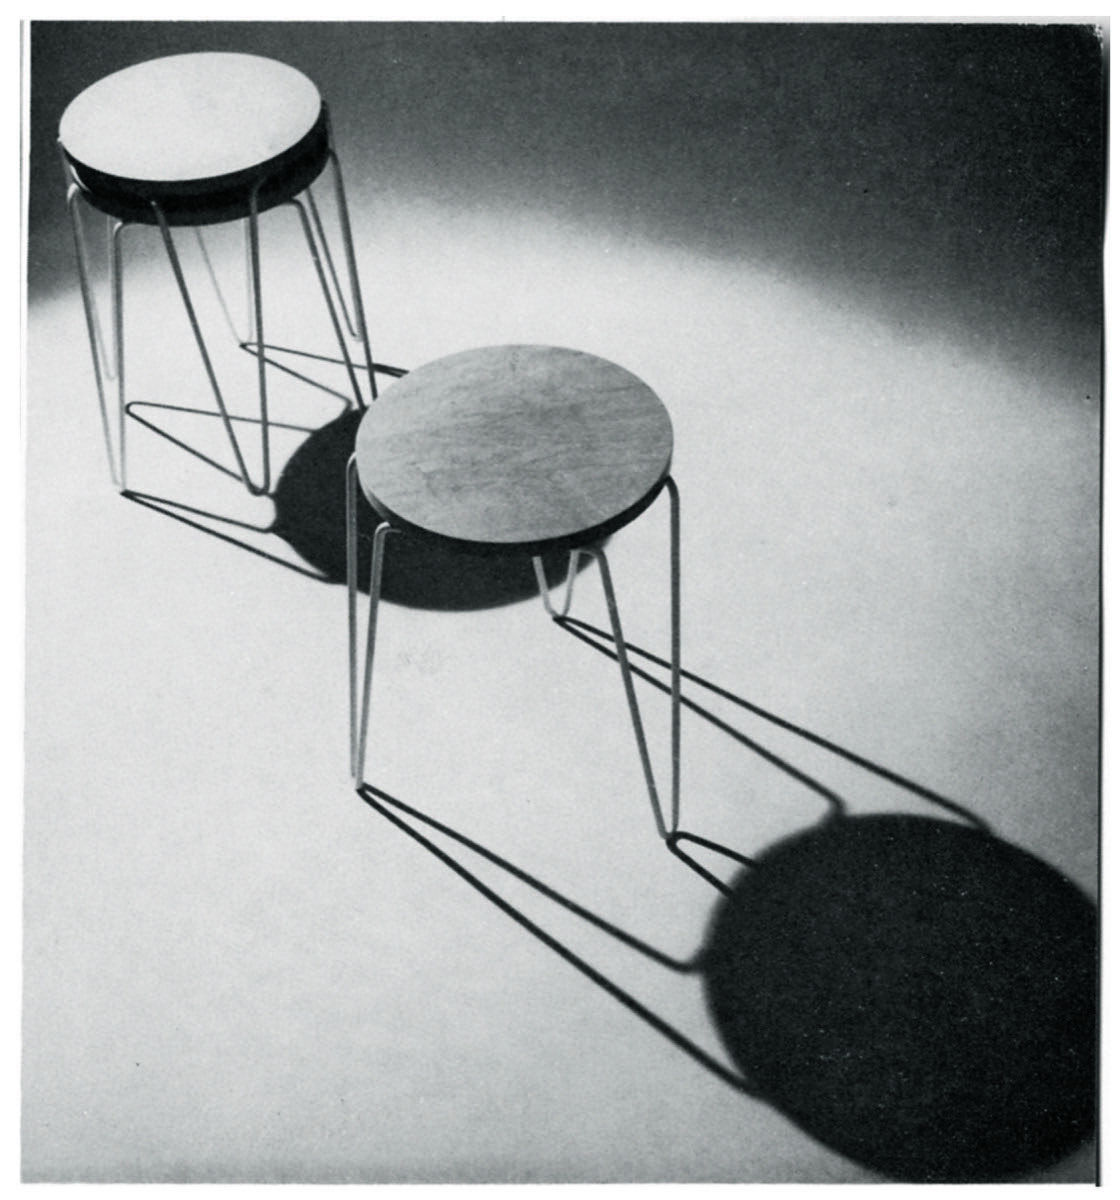 The “Hairpin” Stacking Stool. Courtesy of Knoll, Inc.